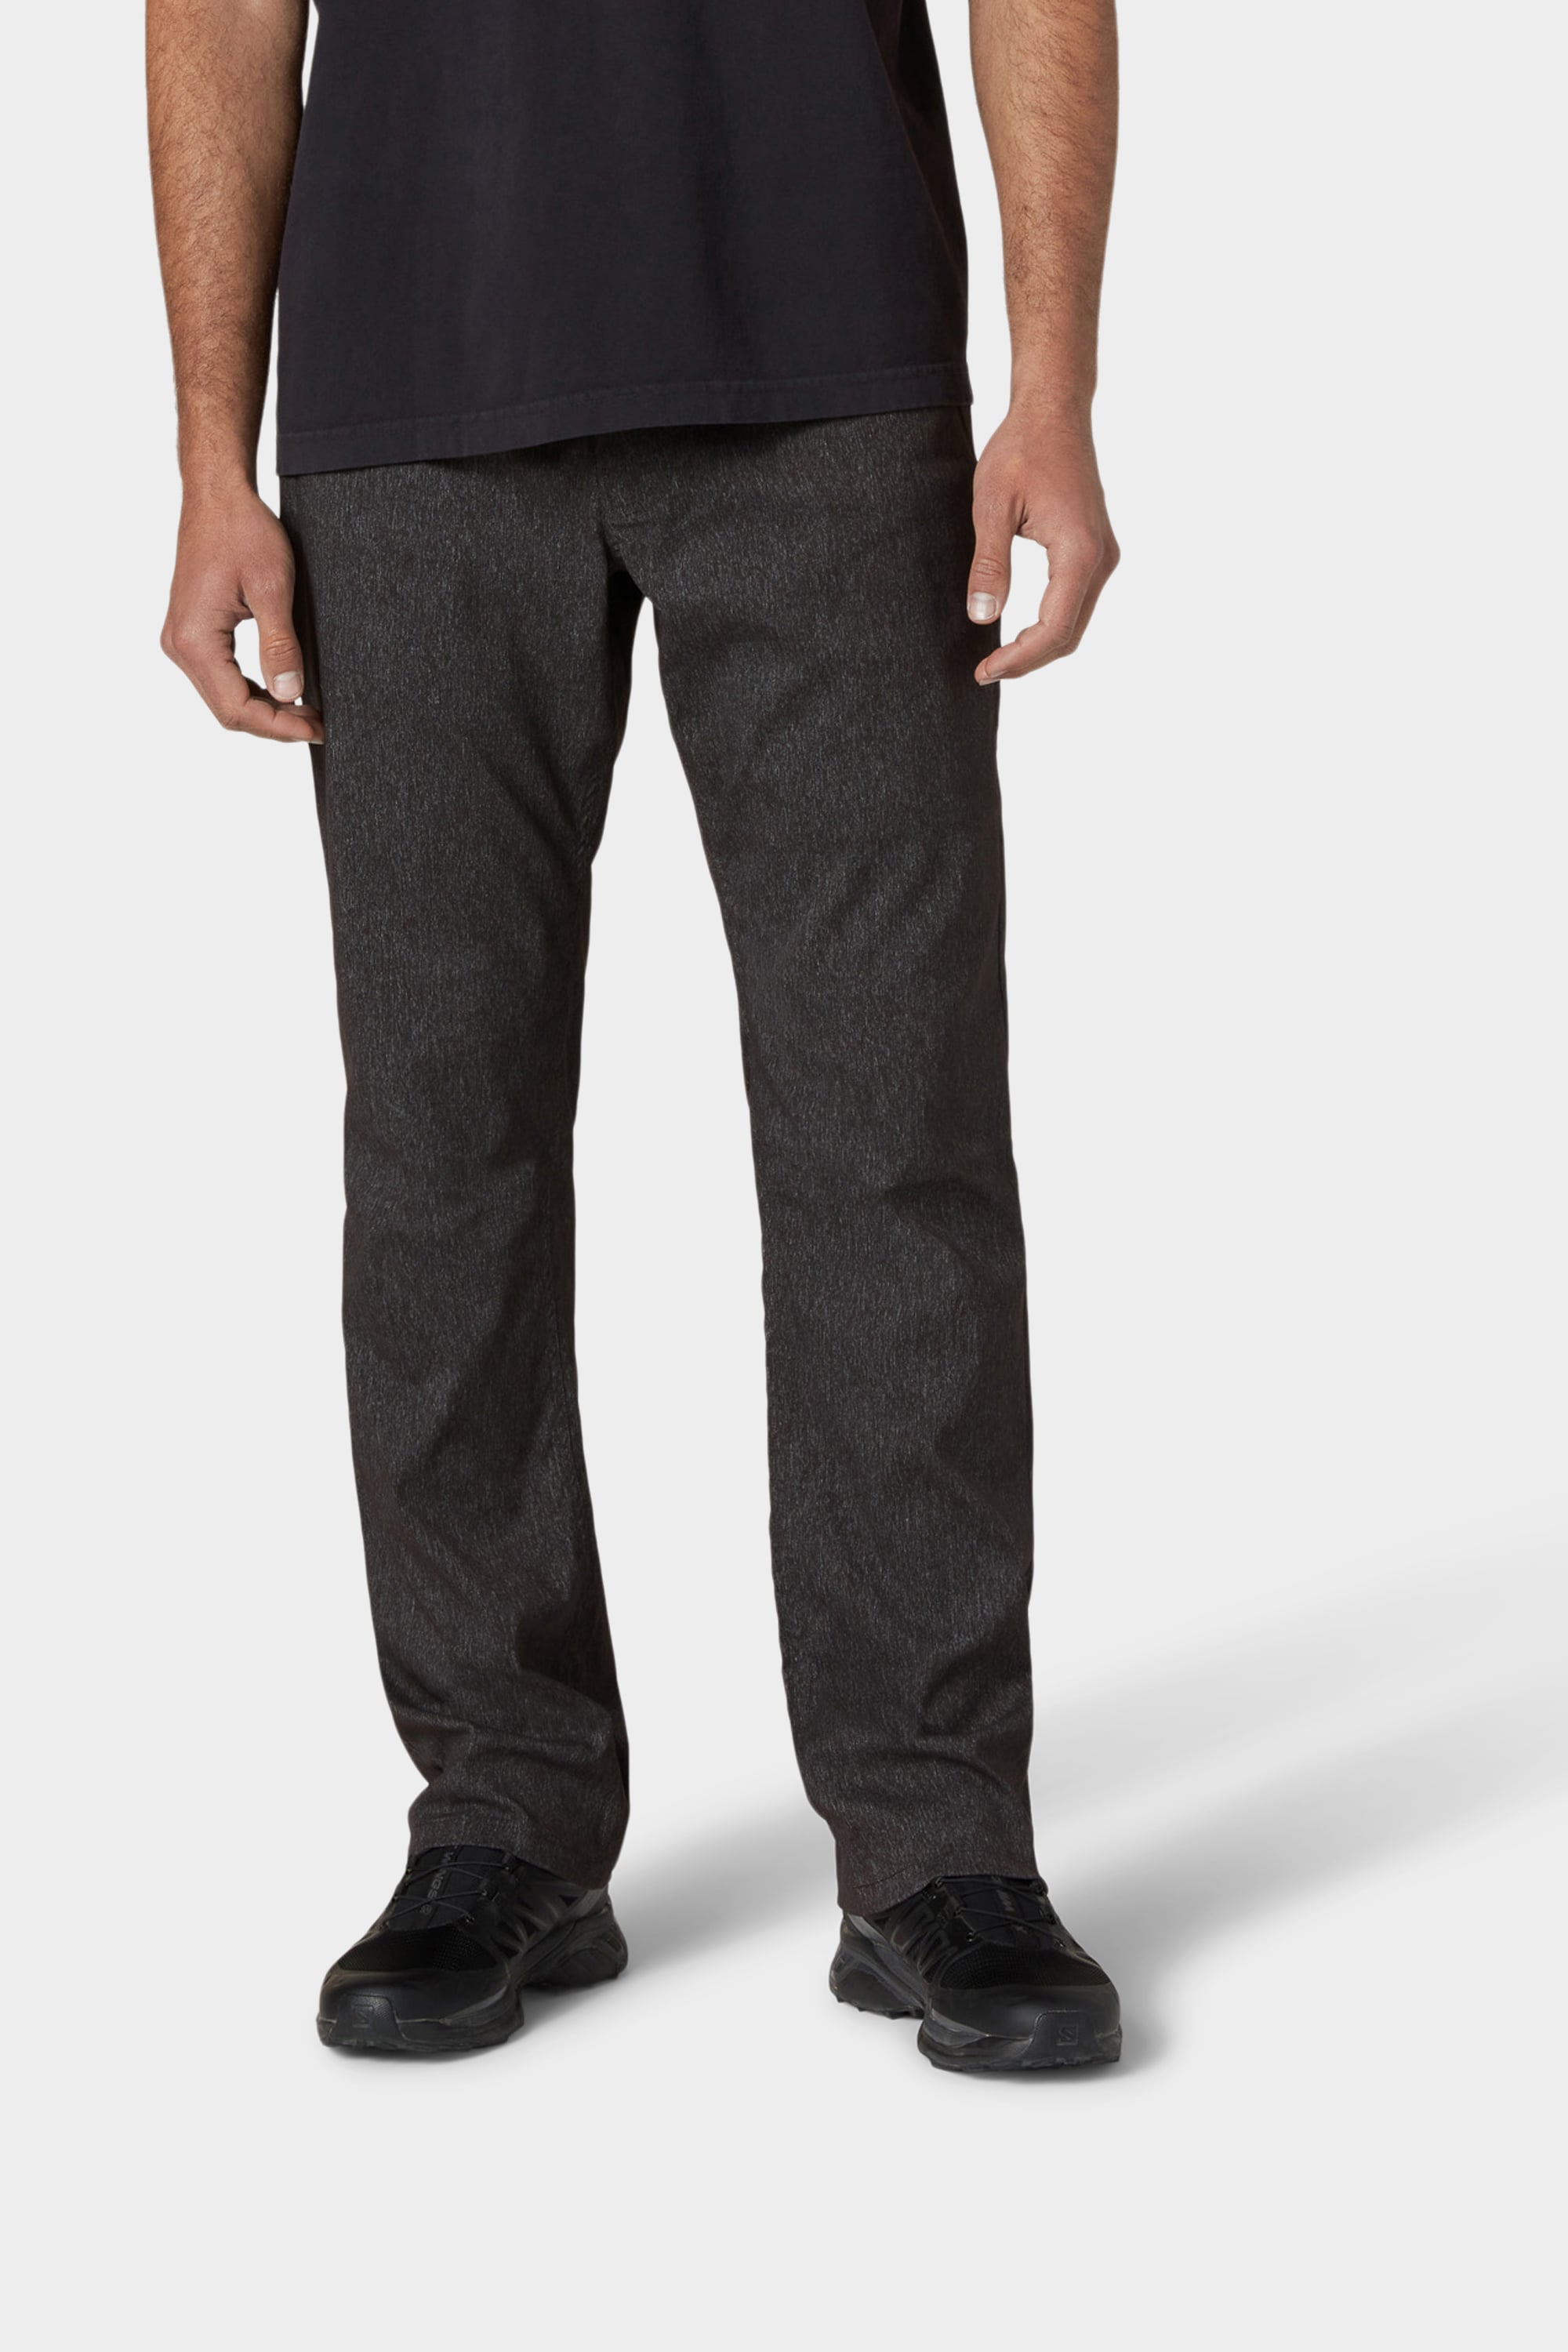 686 Men's Everywhere Pant - Relaxed Fit –